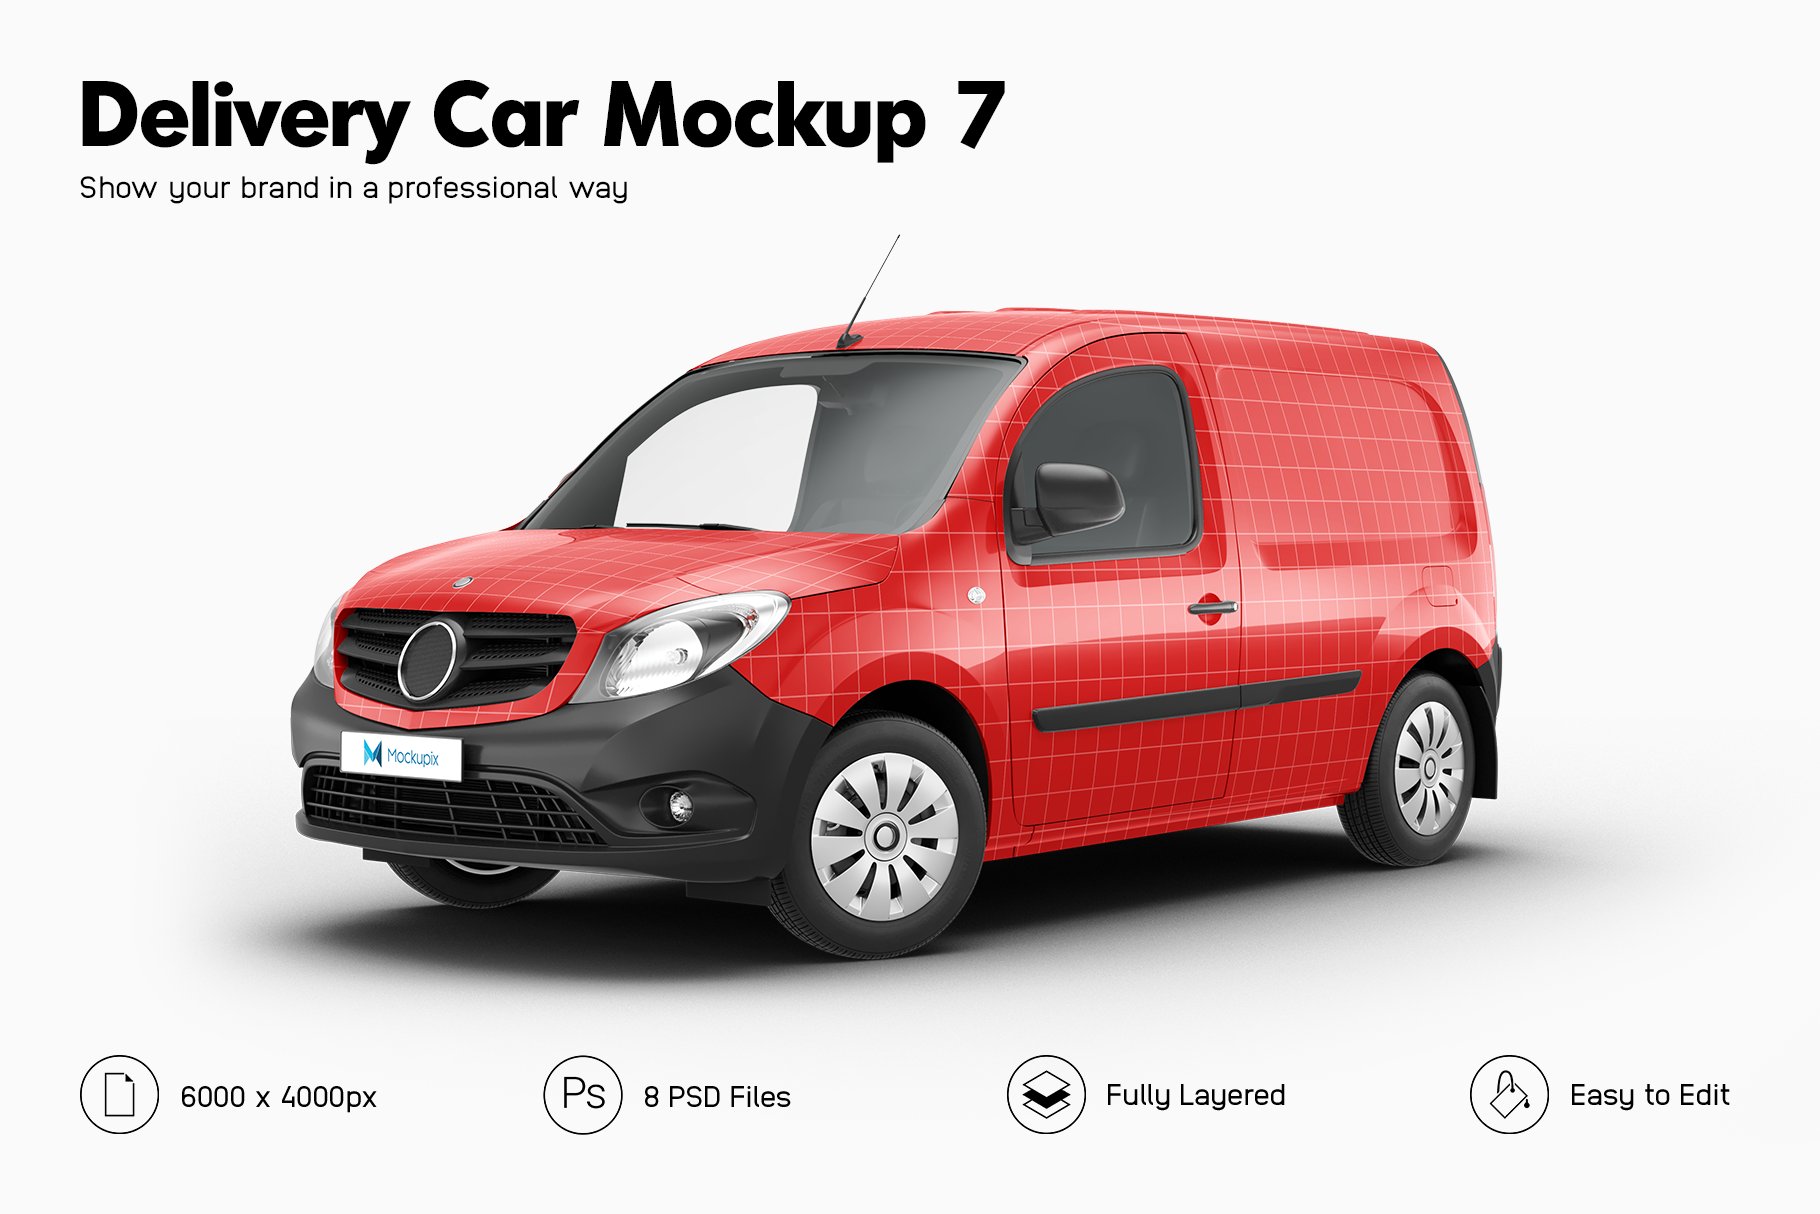 Delivery Car Mockup 7 cover image.